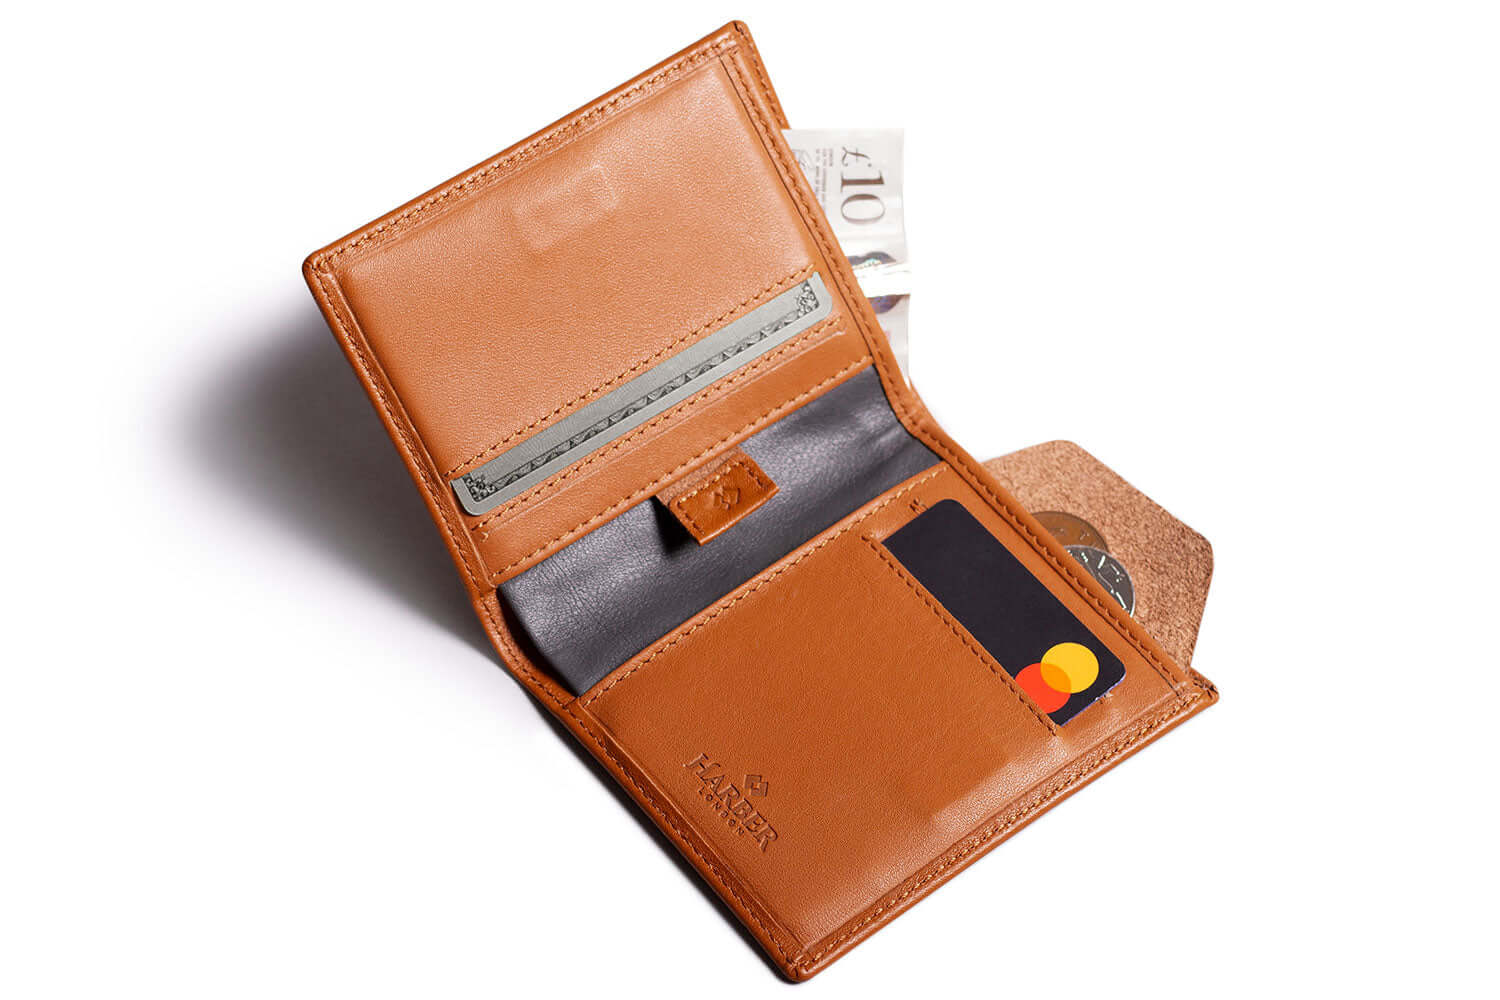 The Bifold Wallet